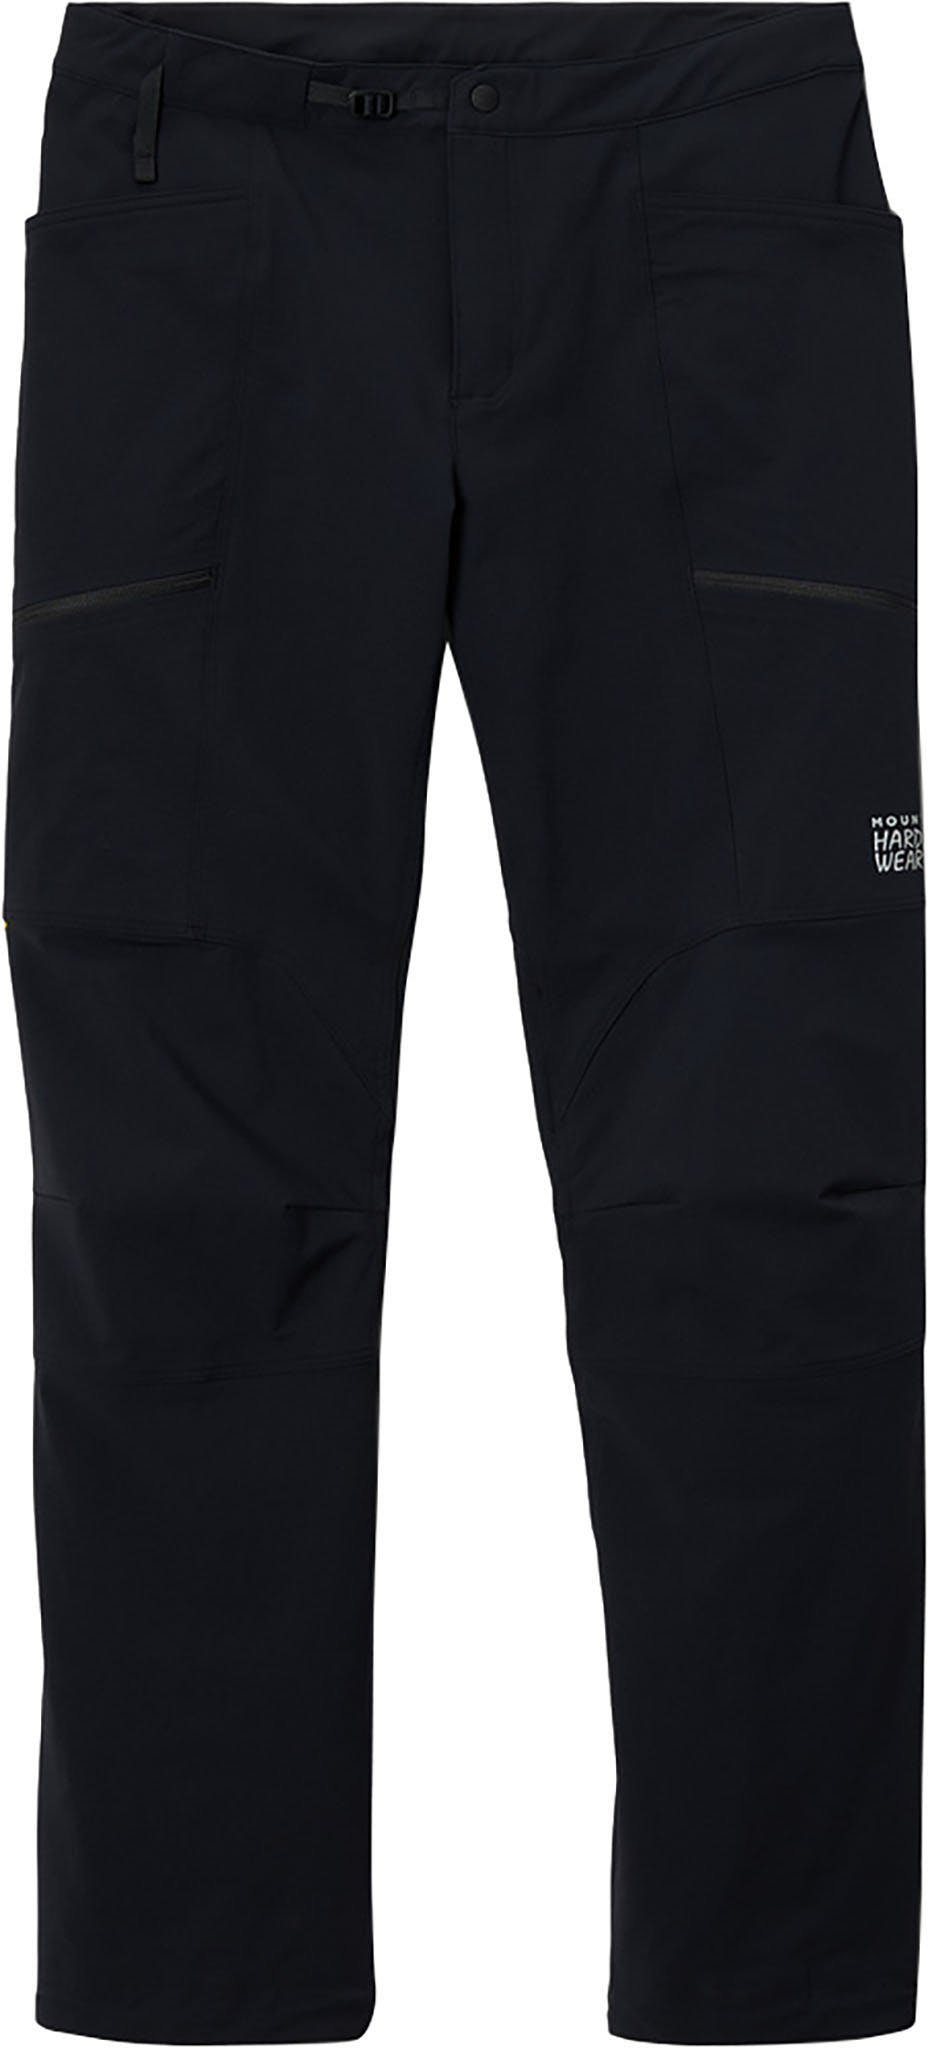 Product image for Chockstone Alpine Pant - Men's